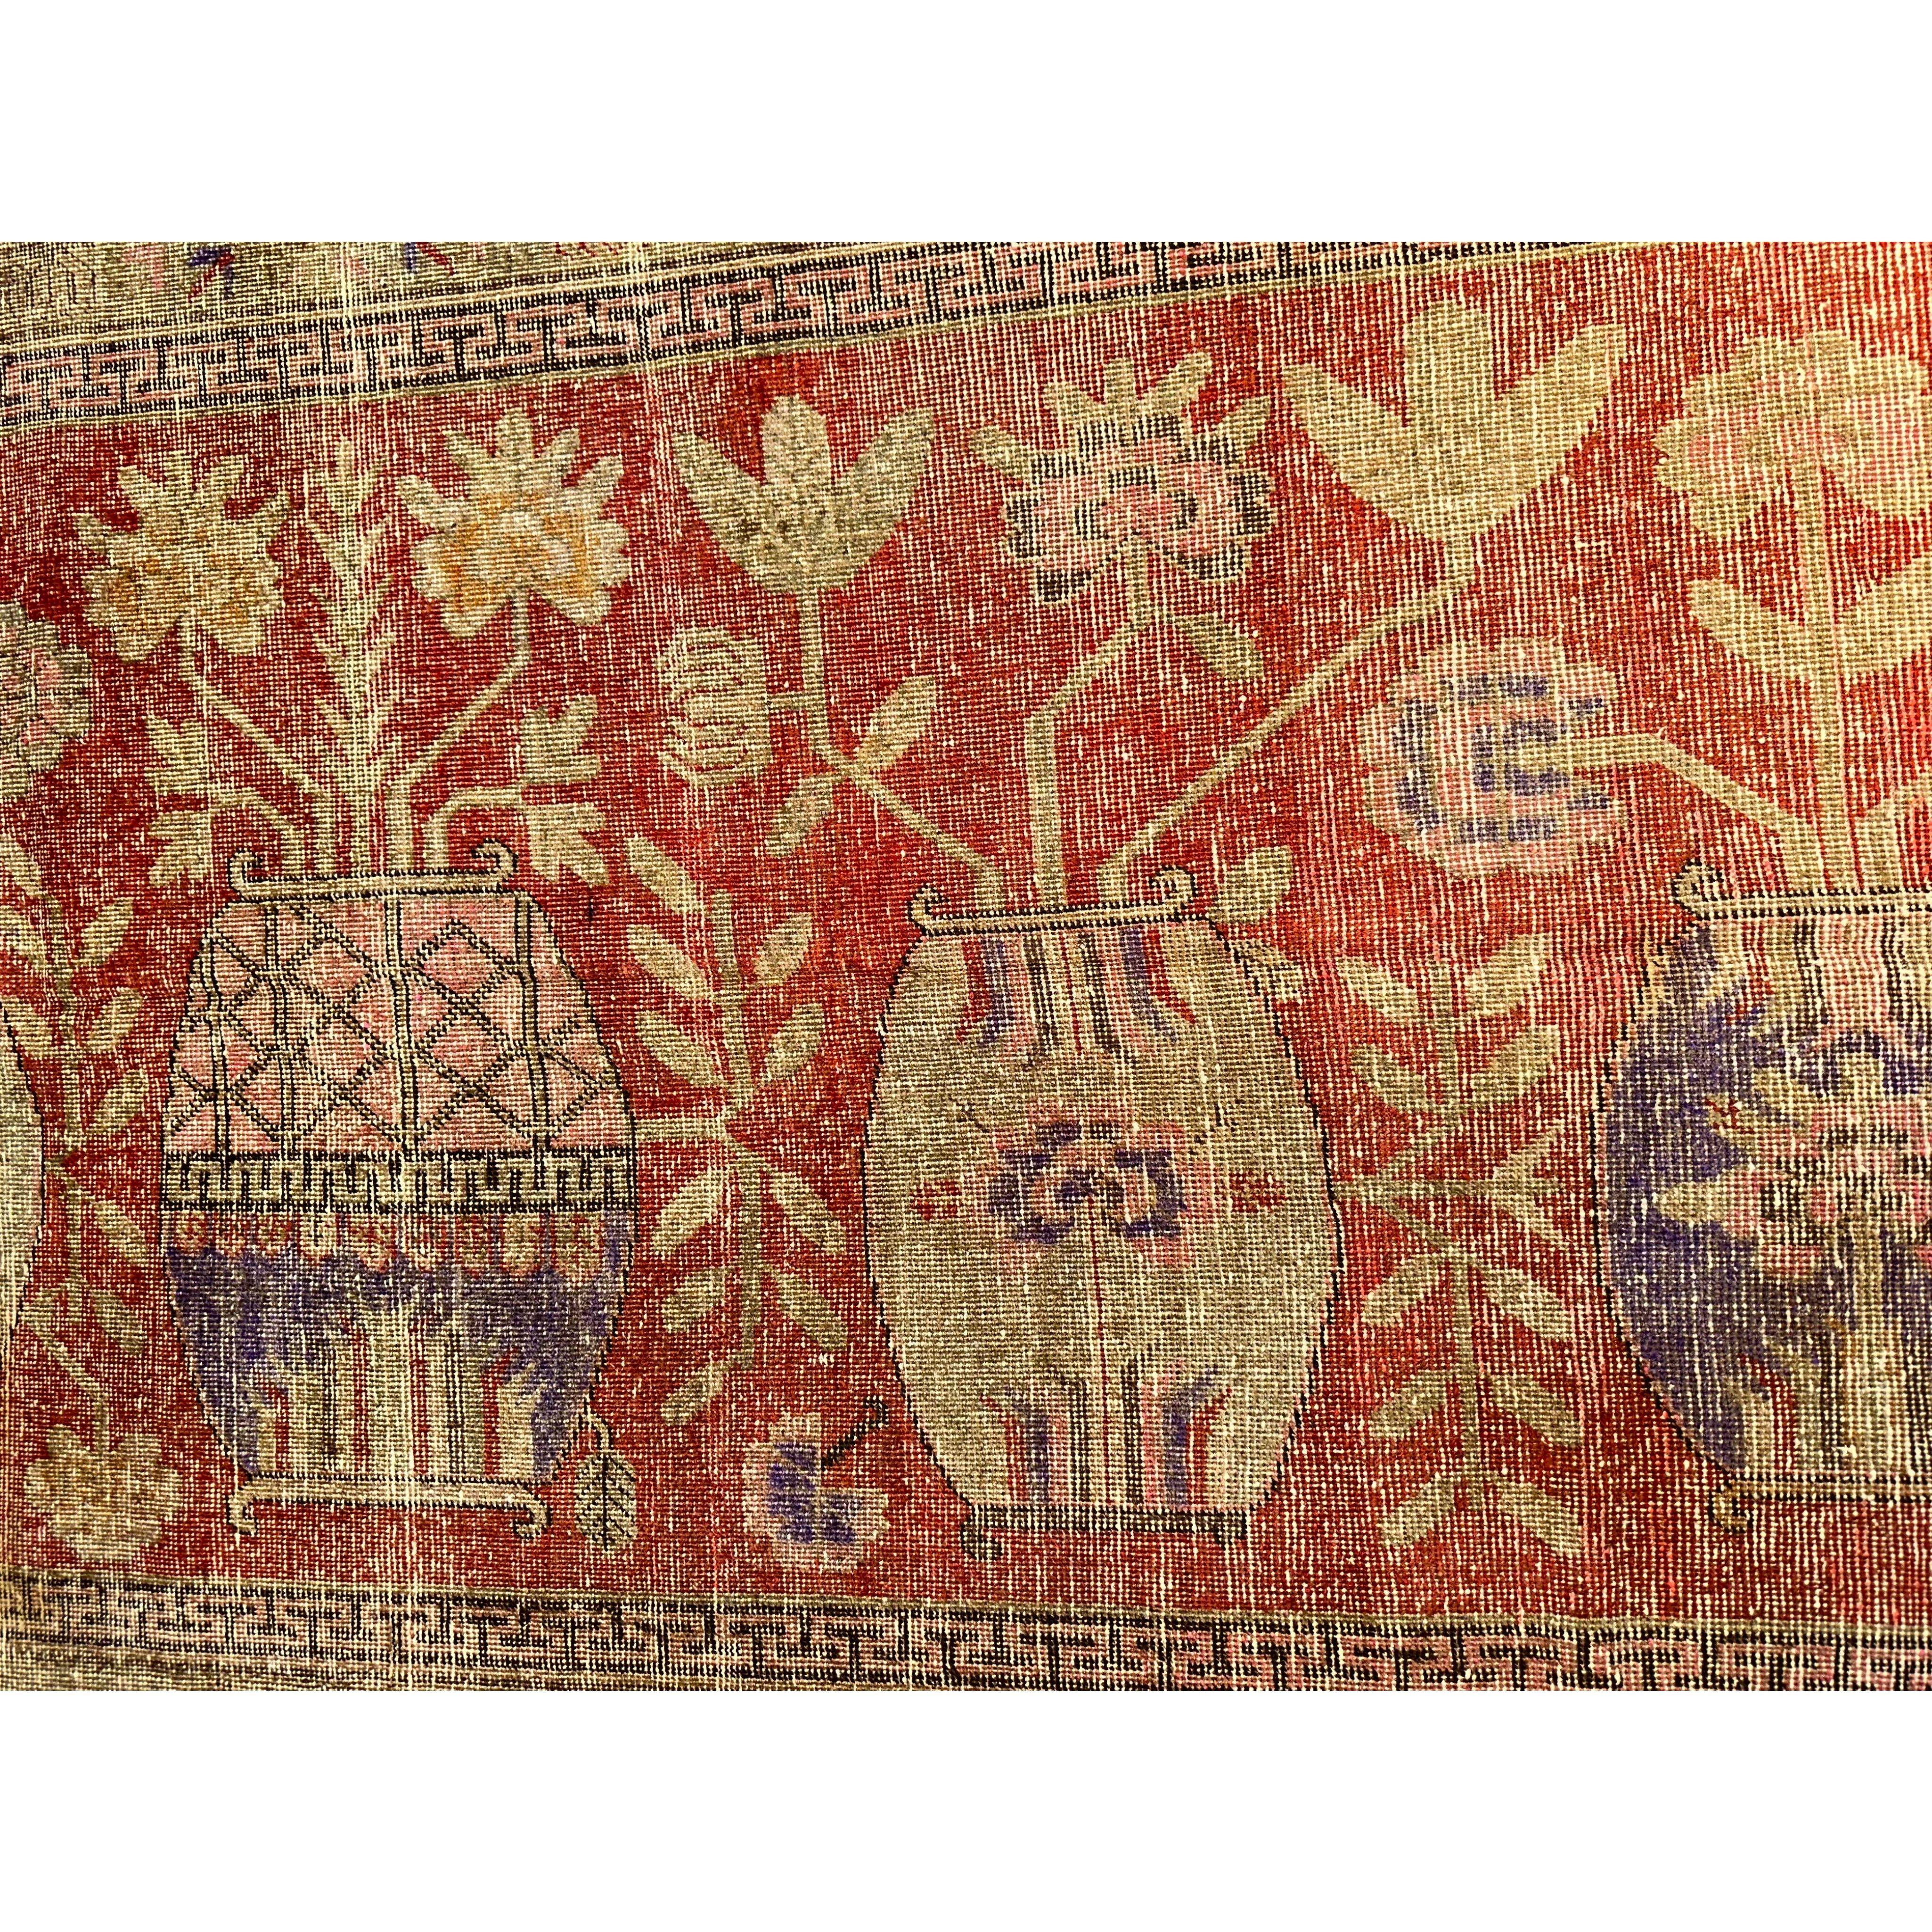 Late-19th Century Khotan Samarkand Rug In Good Condition For Sale In Los Angeles, US